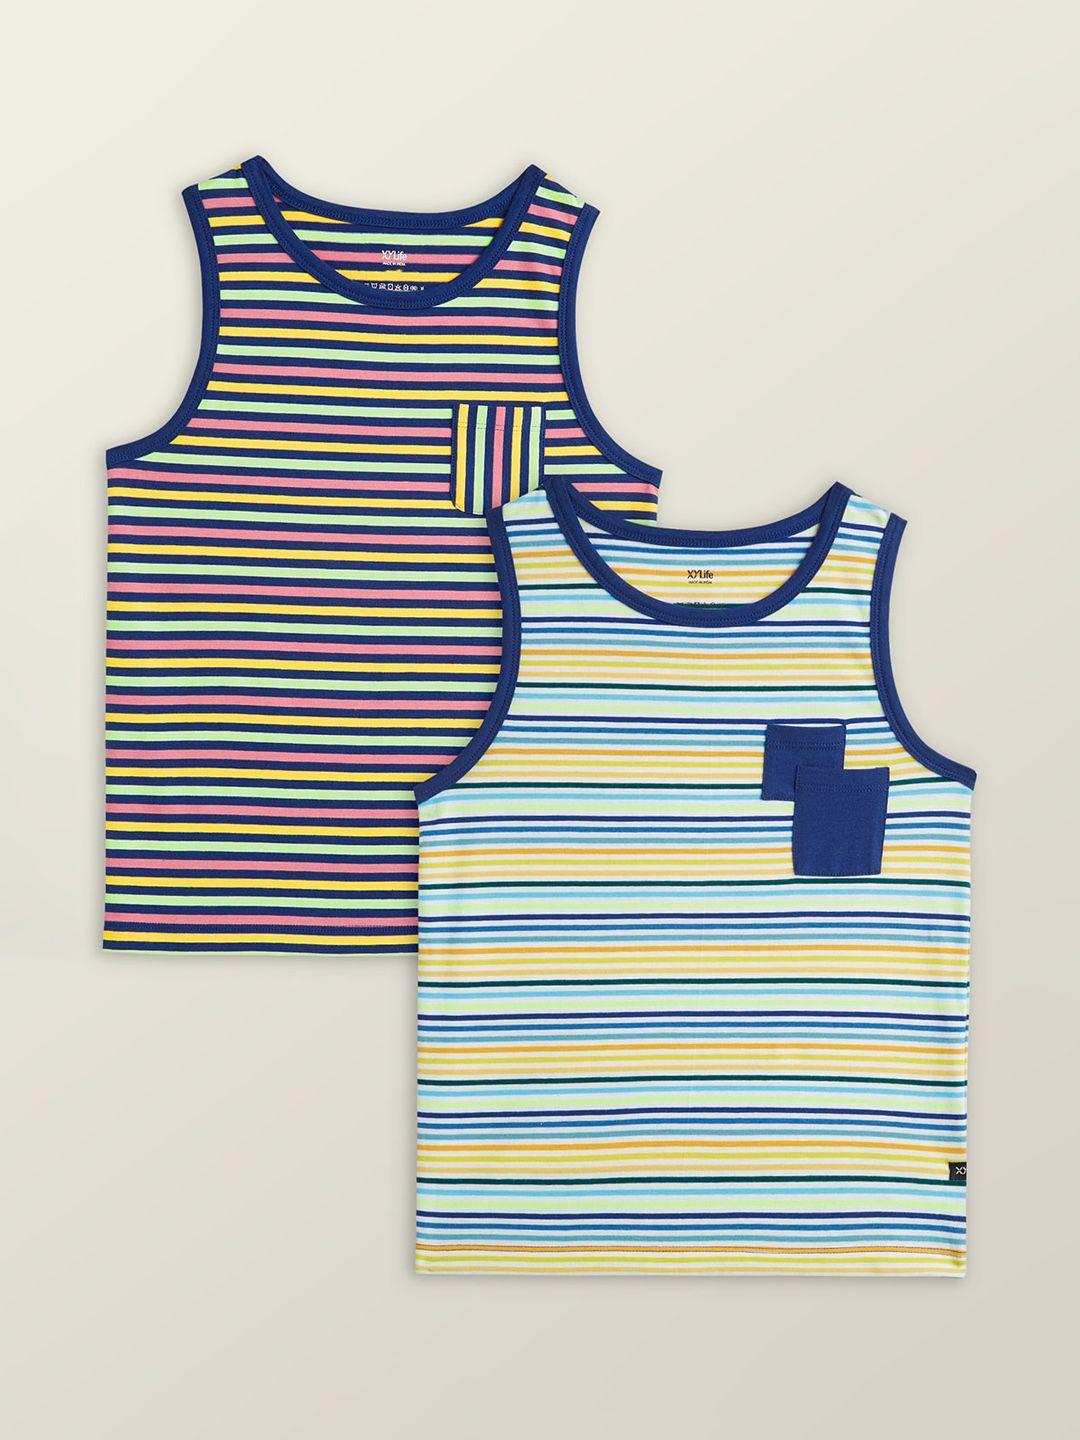 xy-life-boys-pack-of-2-striped-innerwear-vests